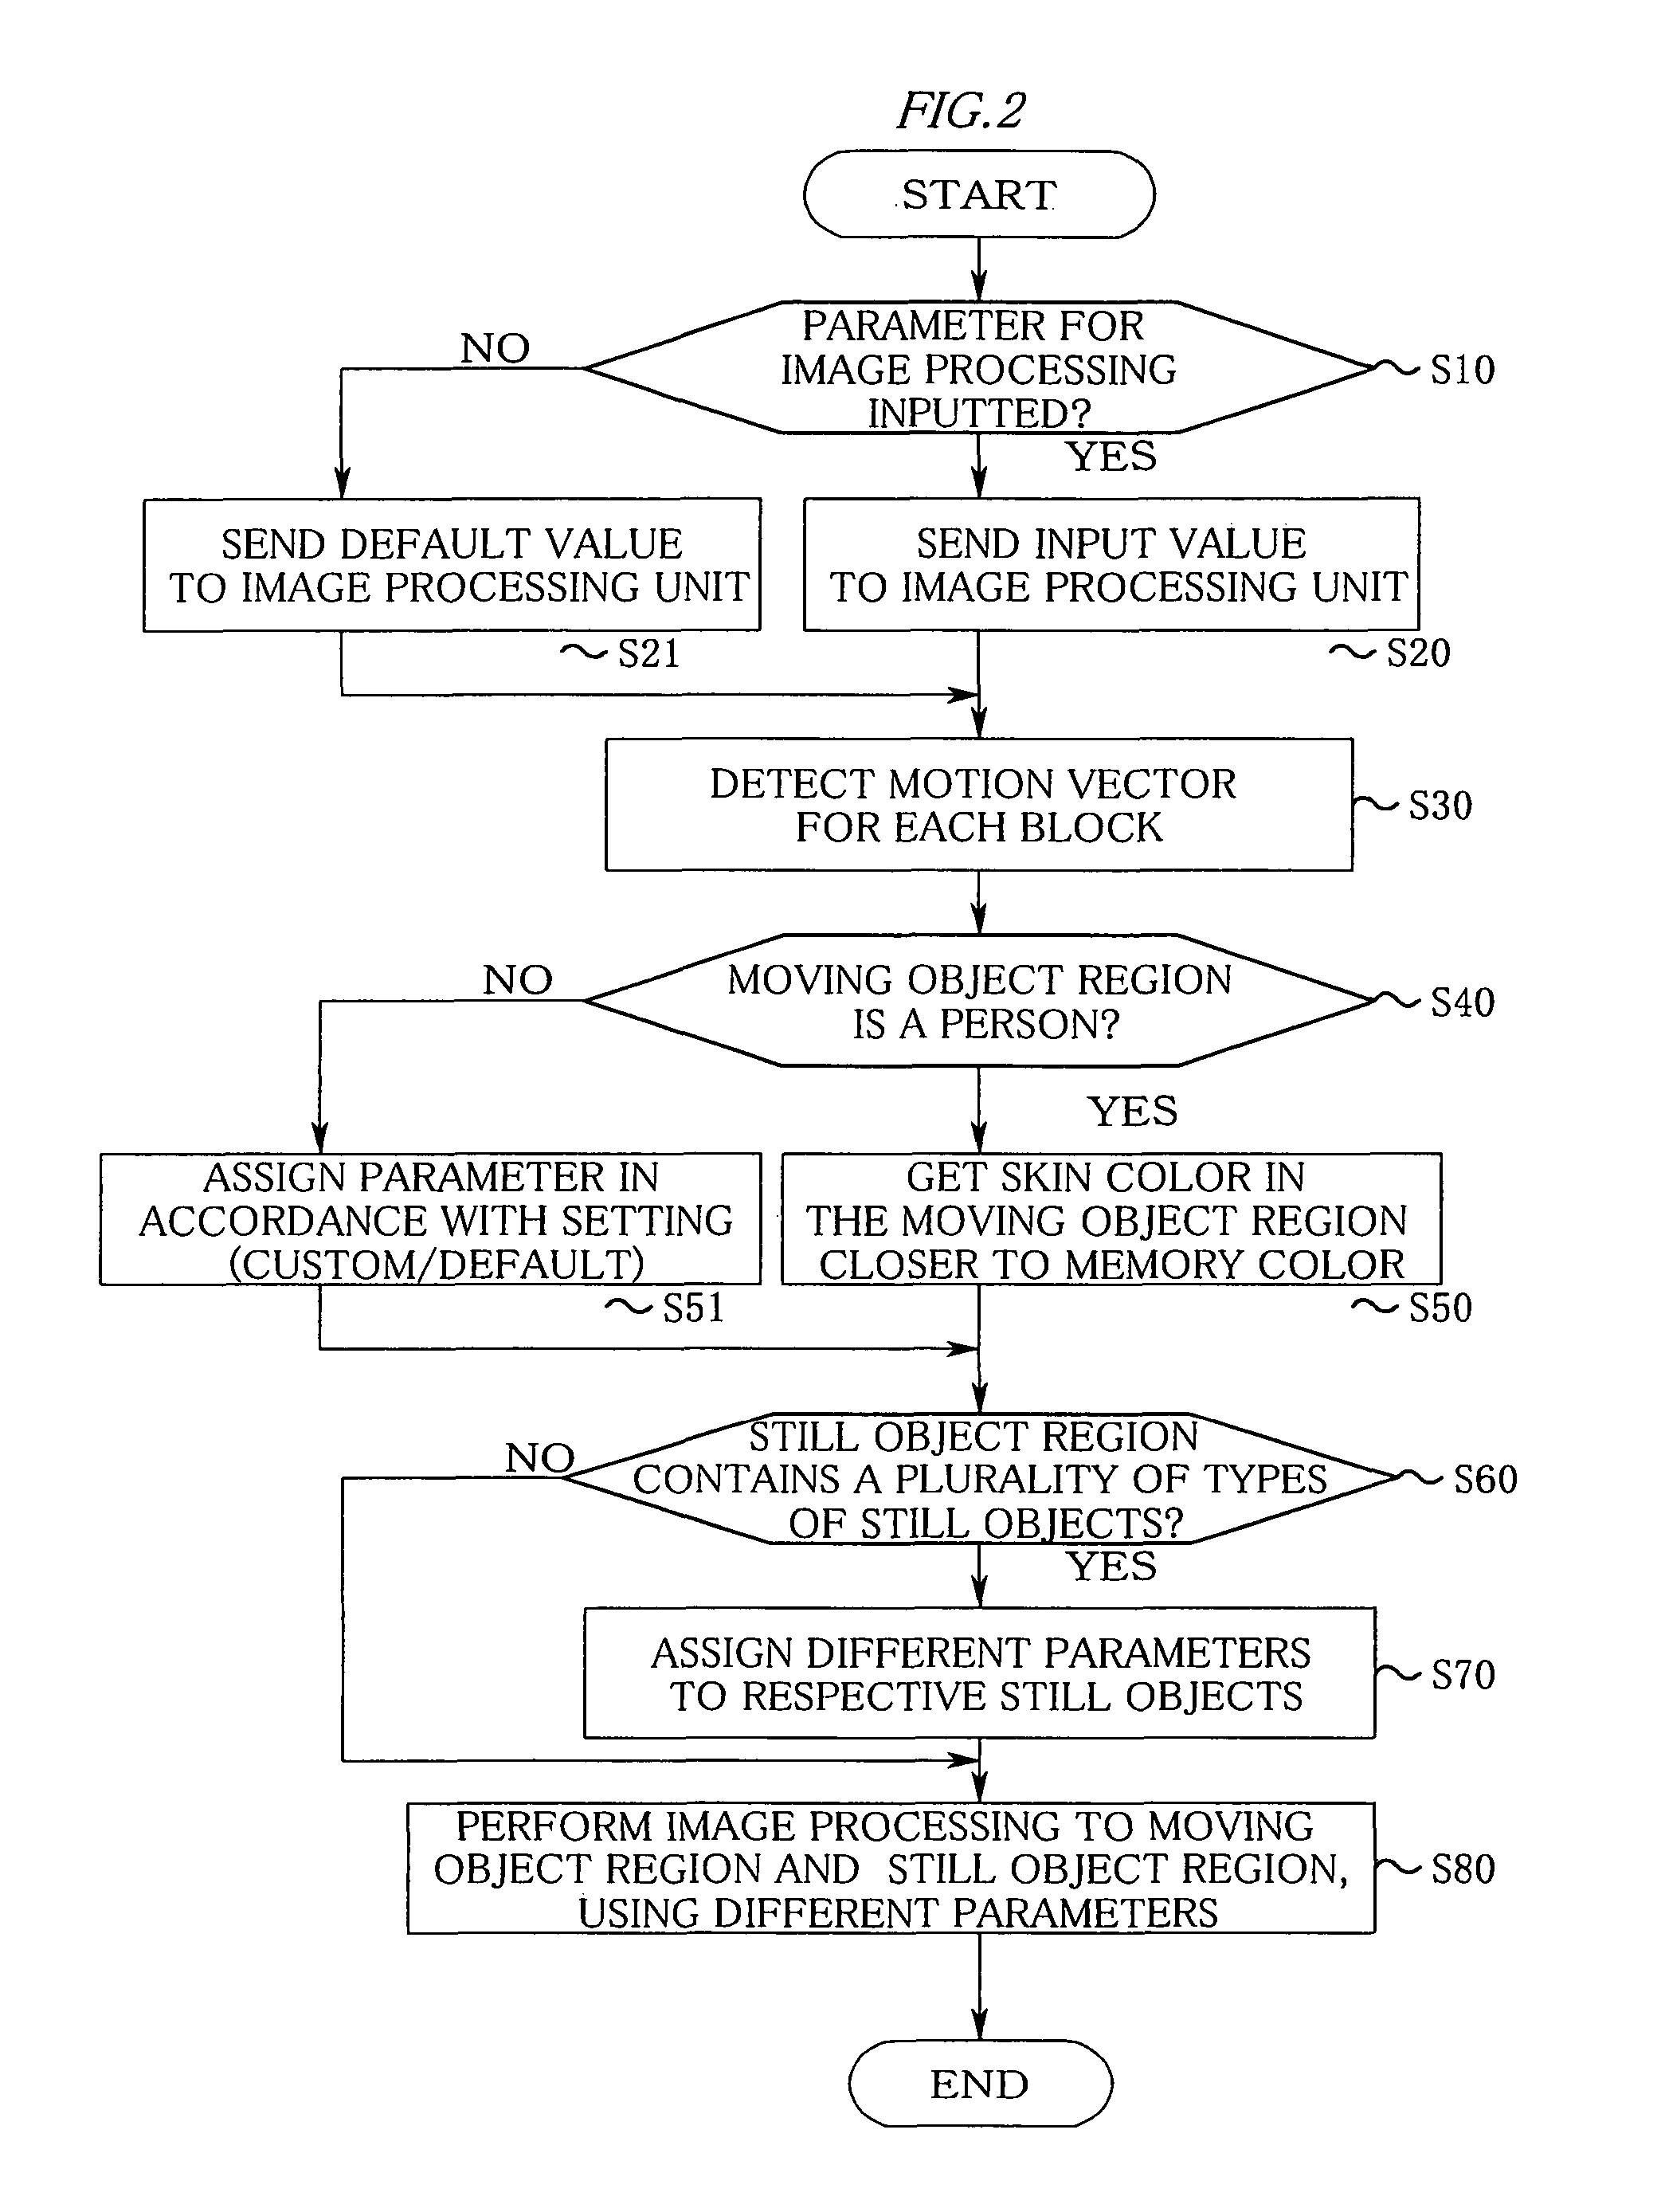 Moving image processing device and method for performing different image processings to moving object region and still object region